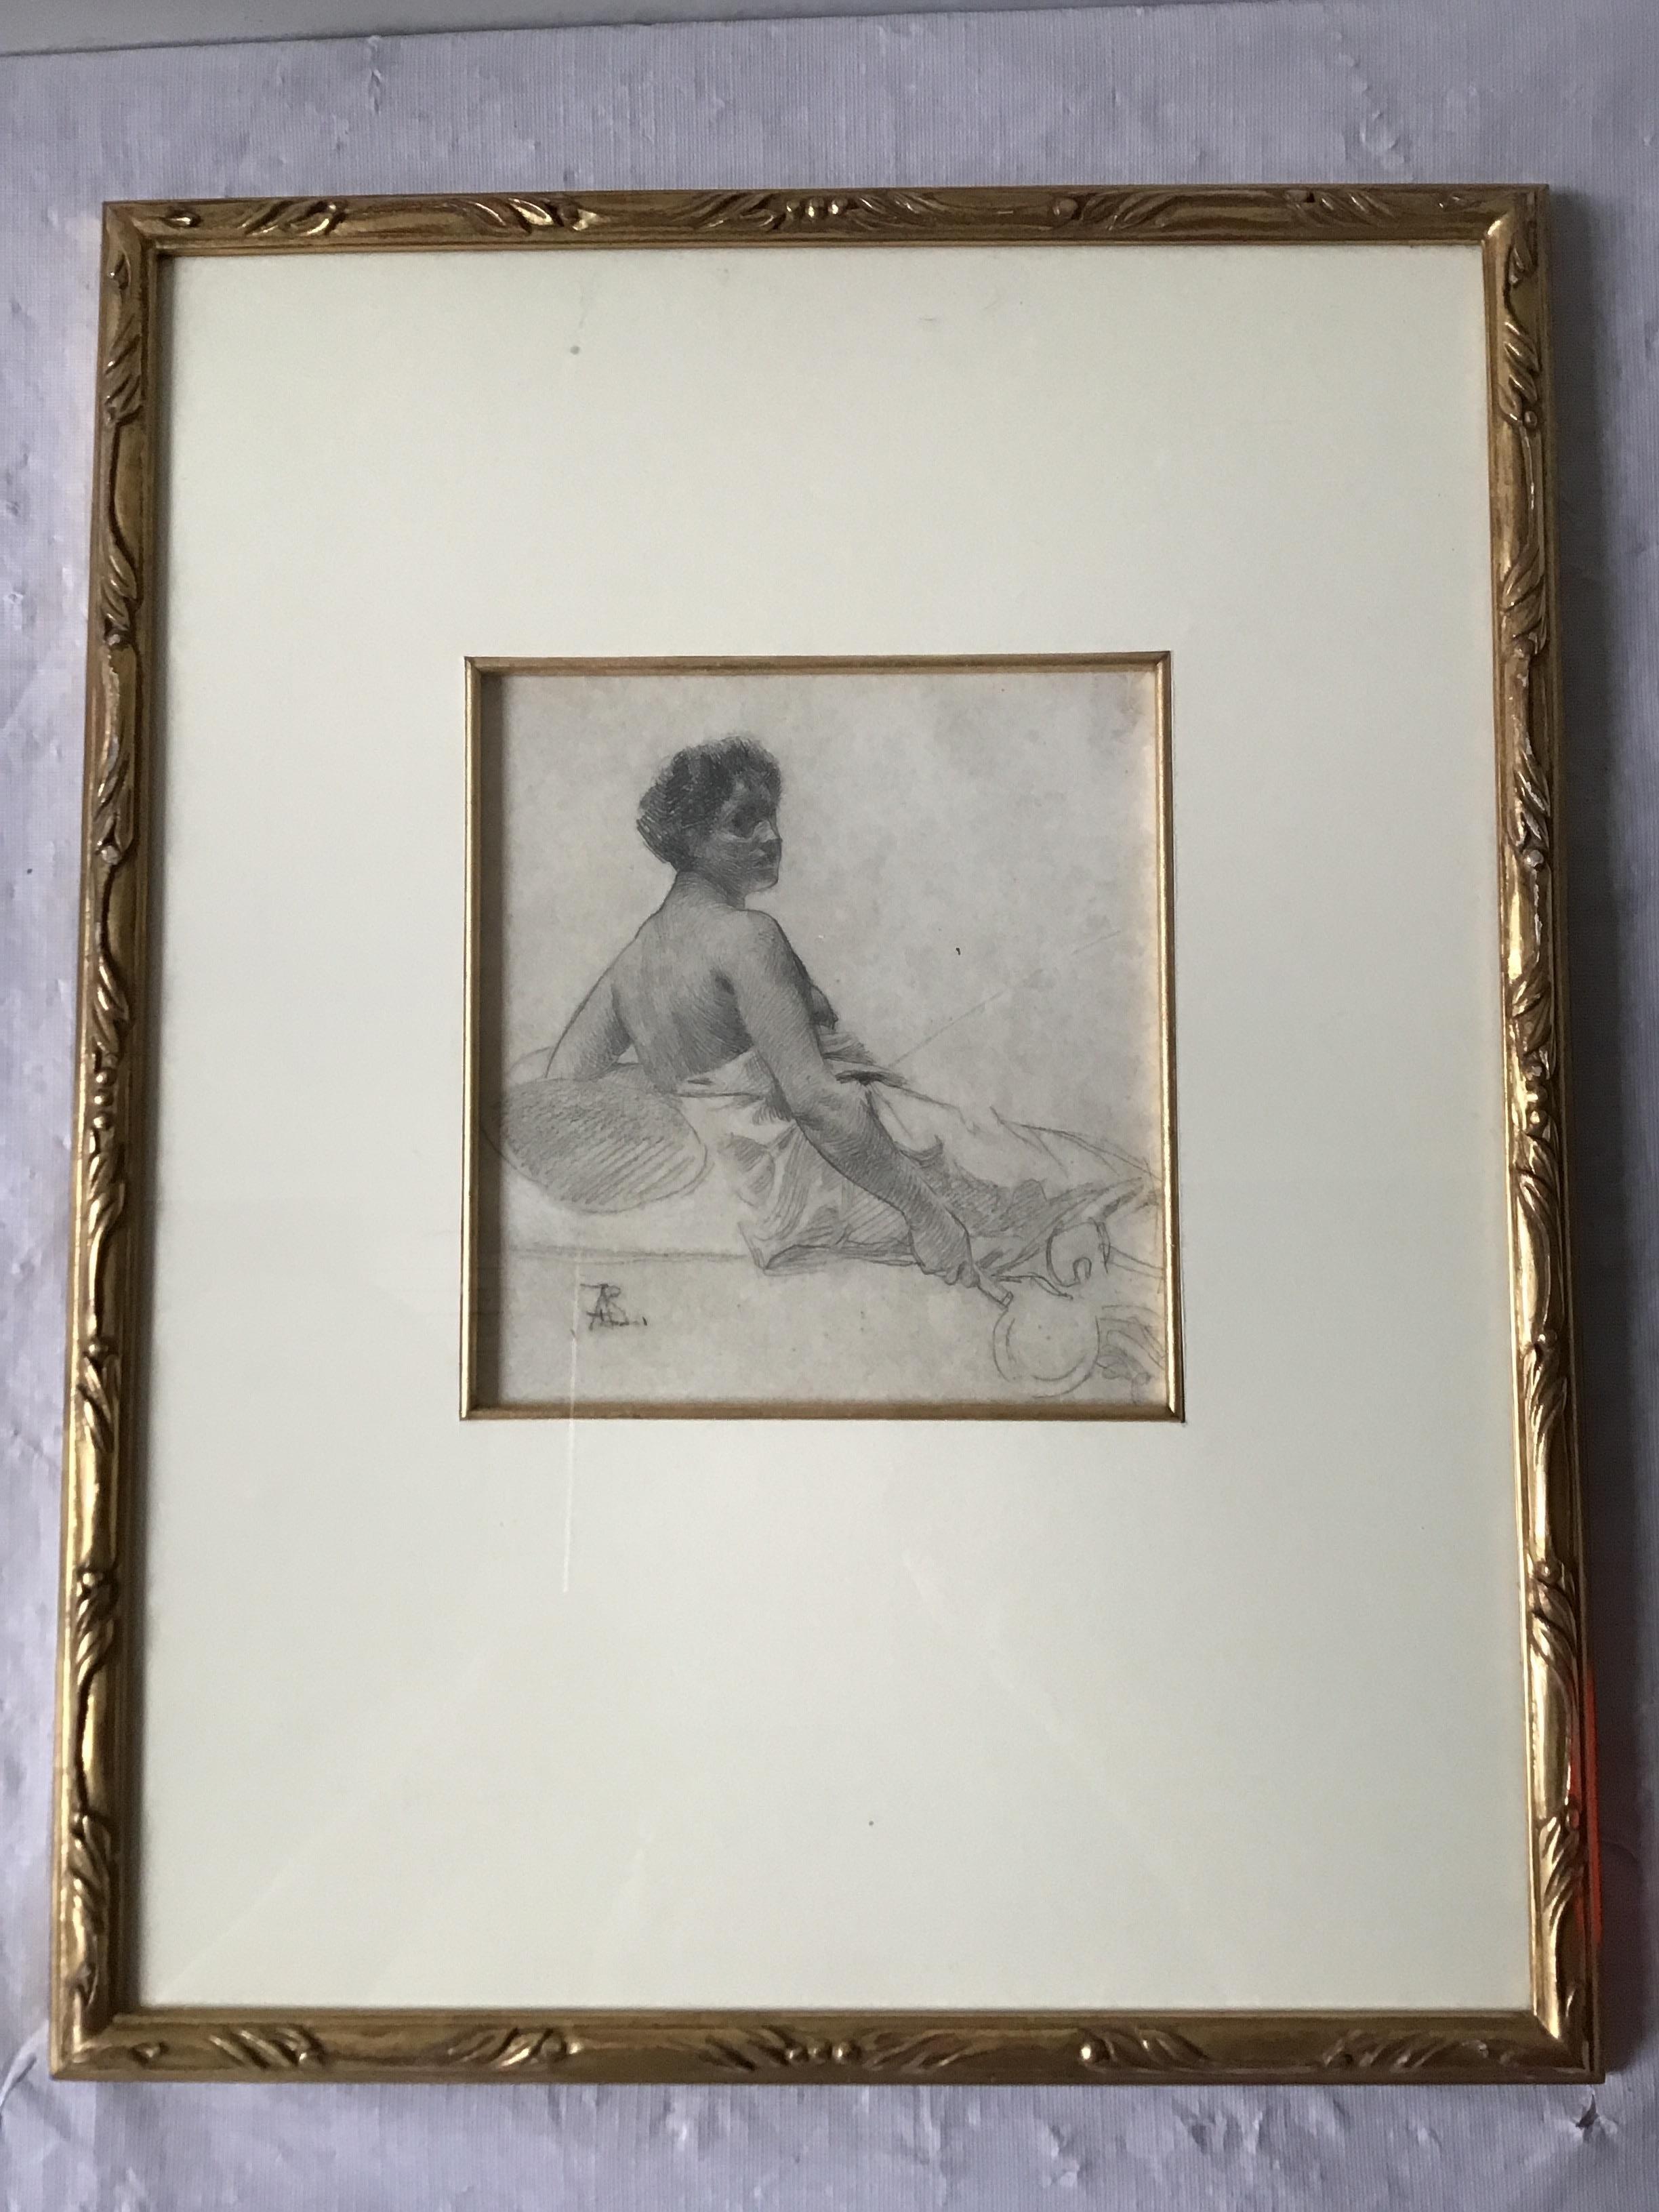 1880s Paul Albert Besnard pencil drawing of a sitting woman. In a gold gilt frame. From a celebrity’s Southampton, NY oceanfront estate.